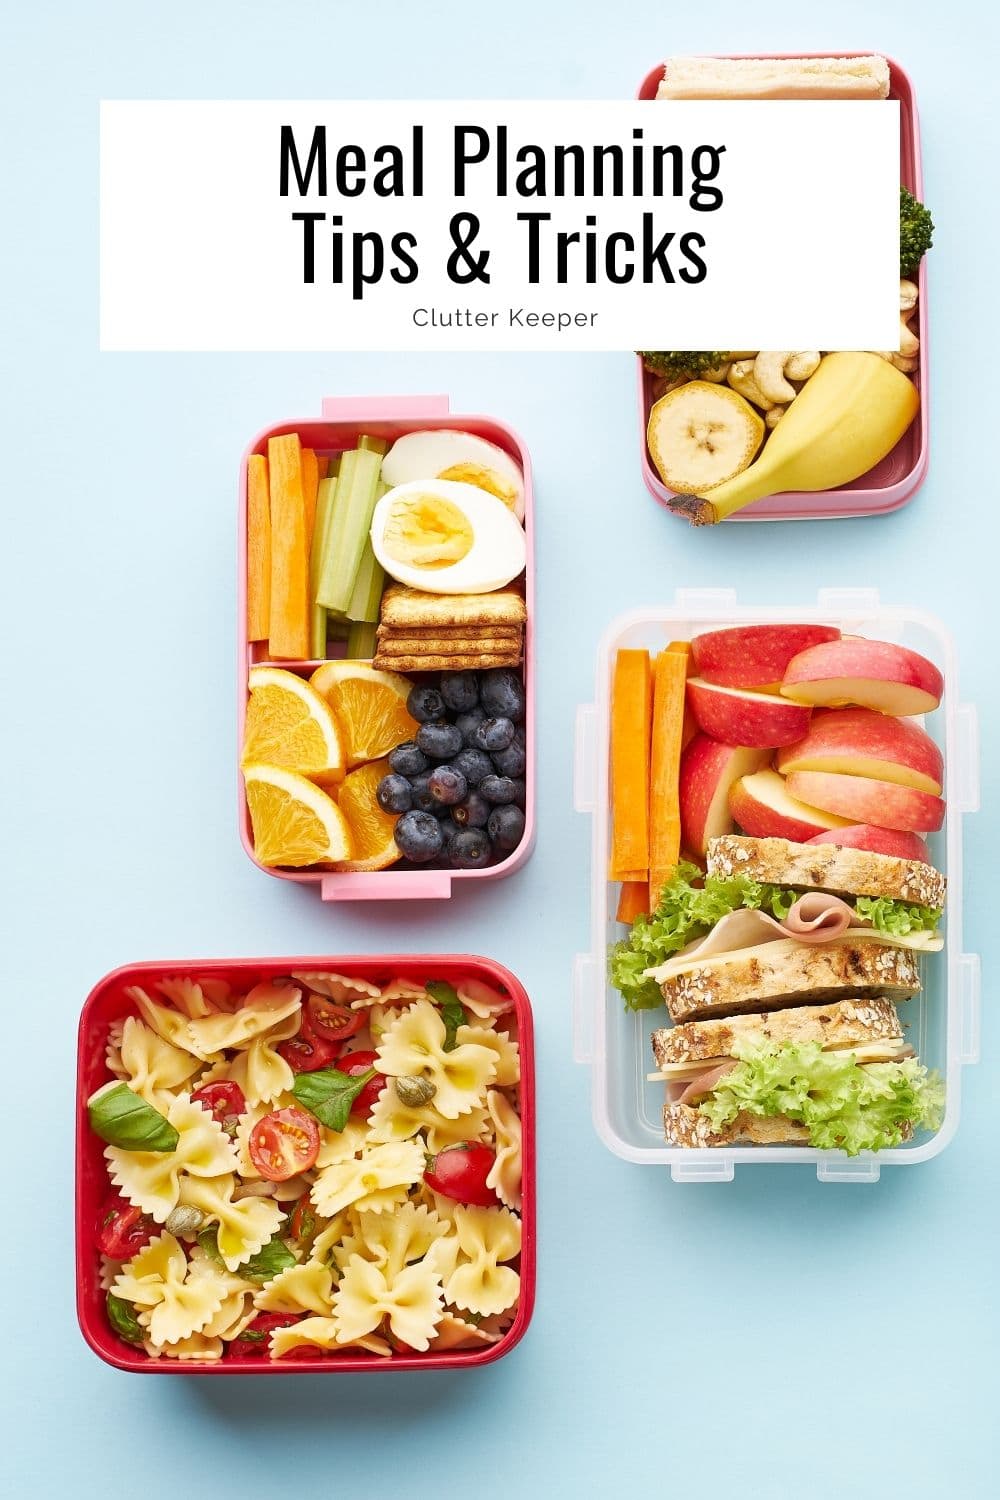 Plastic tubs holding pasta salad, fresh fruit and vegetables, and sandwiches with text overlay 